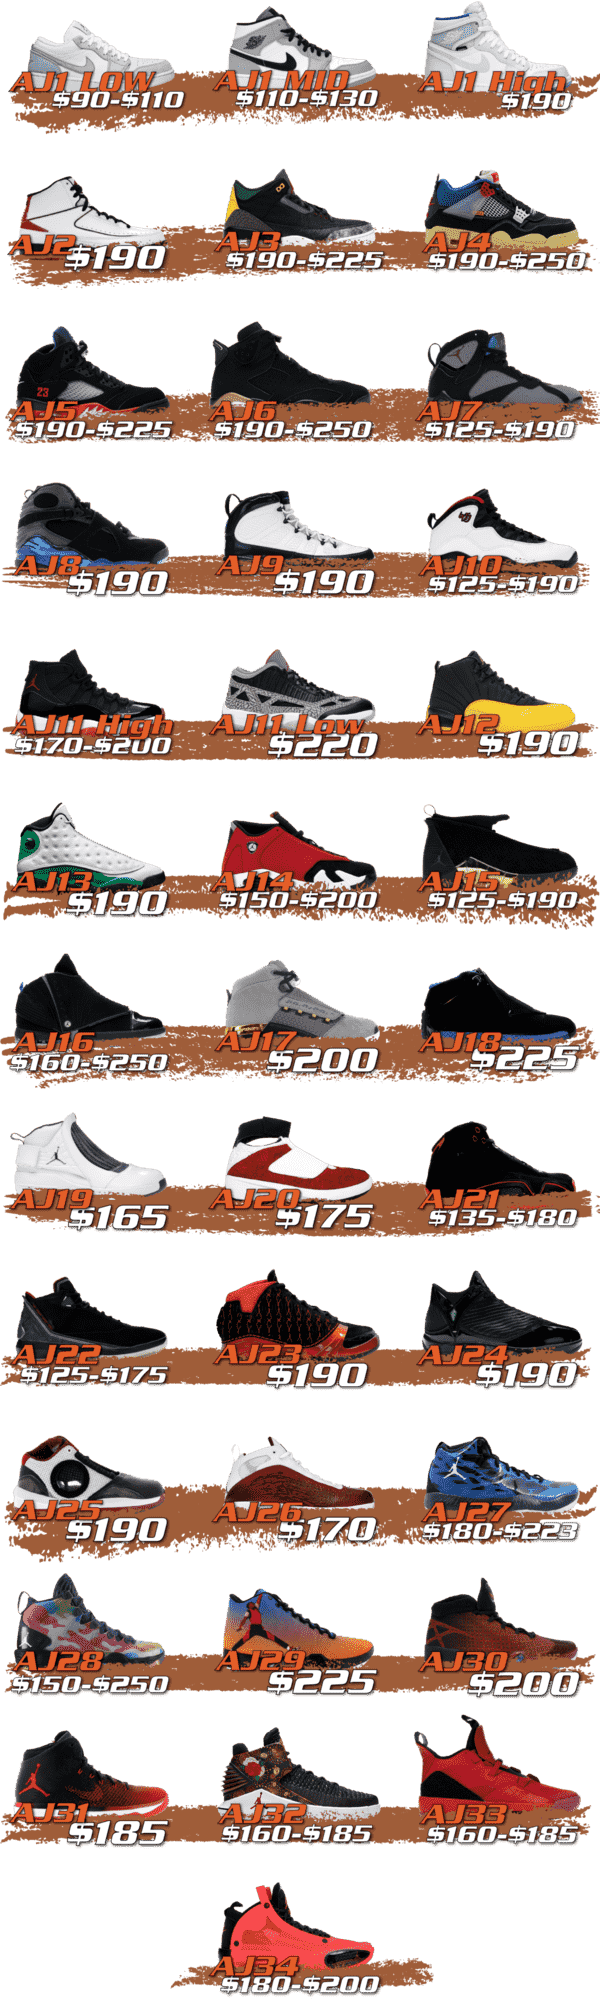 How Much Do They Really Cost? [Complete Guide to Air Jordan Prices]